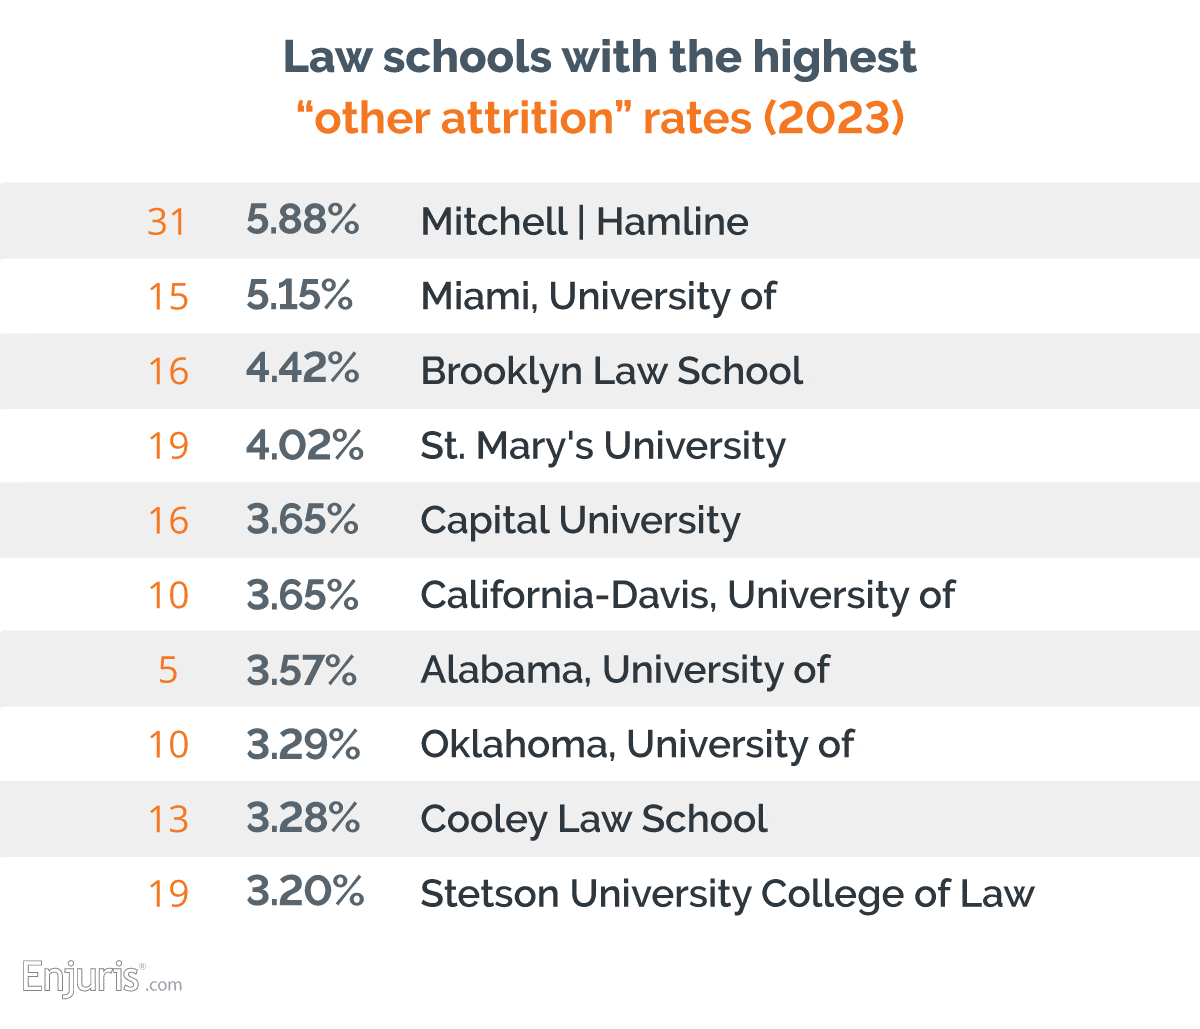 Law schools with the highest “other attrition” rates (2023)